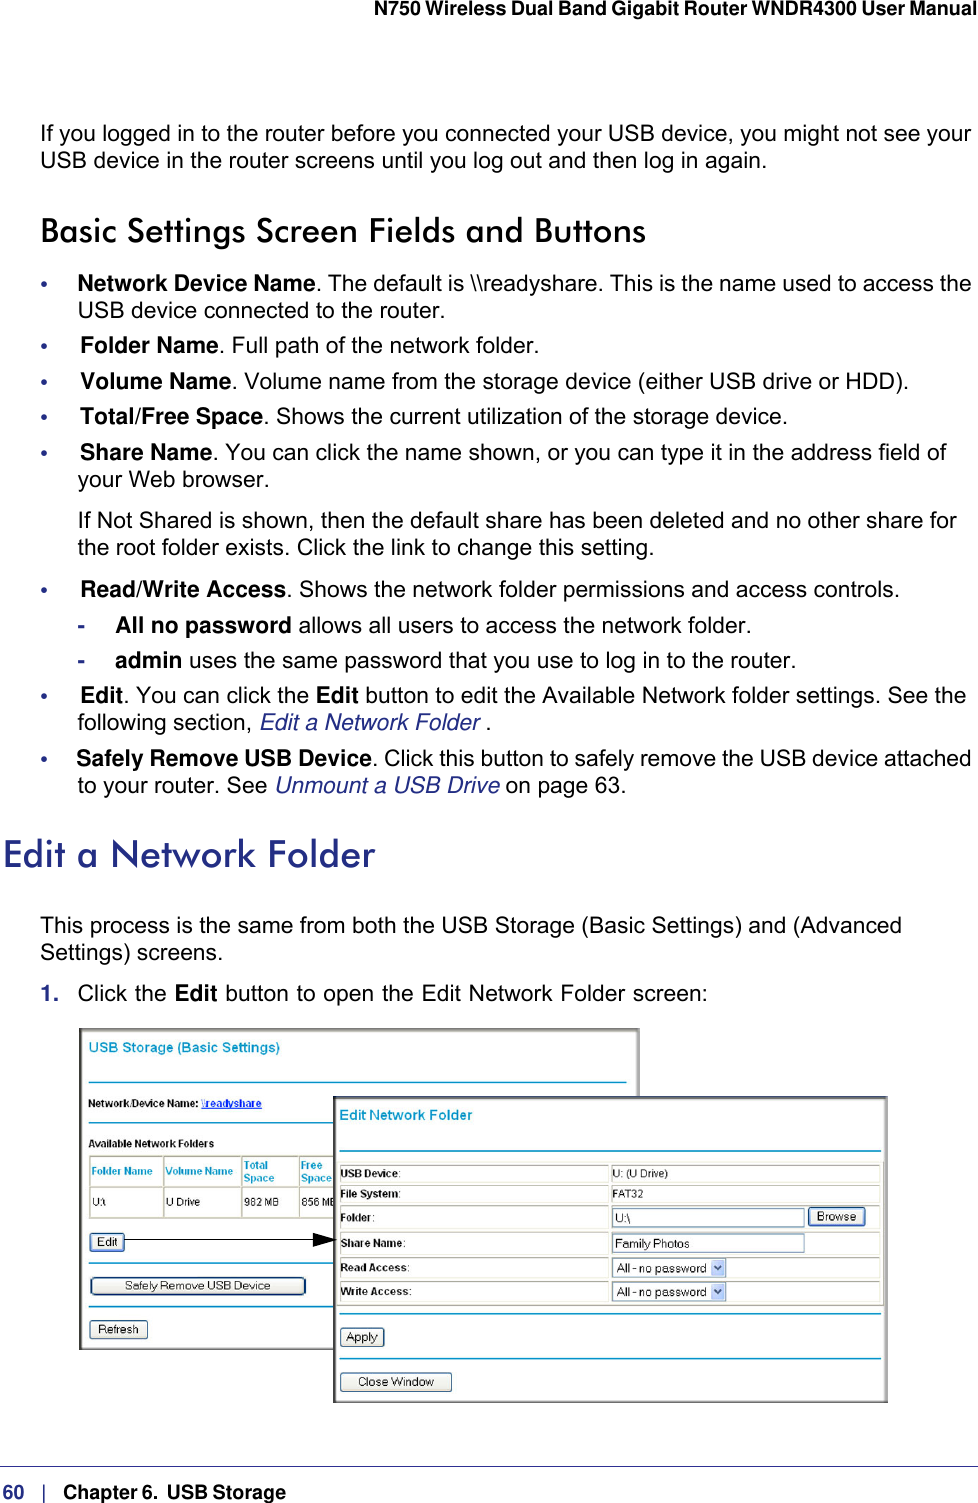 60   |   Chapter 6.  USB Storage  N750 Wireless Dual Band Gigabit Router WNDR4300 User Manual If you logged in to the router before you connected your USB device, you might not see your USB device in the router screens until you log out and then log in again.Basic Settings Screen Fields and Buttons•     Network Device Name. The default is \\readyshare. This is the name used to access the USB device connected to the router.•     Folder Name. Full path of the network folder. •     Volume Name. Volume name from the storage device (either USB drive or HDD). •     Total/Free Space. Shows the current utilization of the storage device. •     Share Name. You can click the name shown, or you can type it in the address field of your Web browser.If Not Shared is shown, then the default share has been deleted and no other share for the root folder exists. Click the link to change this setting.•     Read/Write Access. Shows the network folder permissions and access controls.-All no password allows all users to access the network folder. -admin uses the same password that you use to log in to the router. •     Edit. You can click the Edit button to edit the Available Network folder settings. See the following section, Edit a Network Folder .•     Safely Remove USB Device. Click this button to safely remove the USB device attached to your router. See Unmount a USB Drive on page  63.Edit a Network FolderThis process is the same from both the USB Storage (Basic Settings) and (Advanced Settings) screens. 1.  Click the Edit button to open the Edit Network Folder screen: